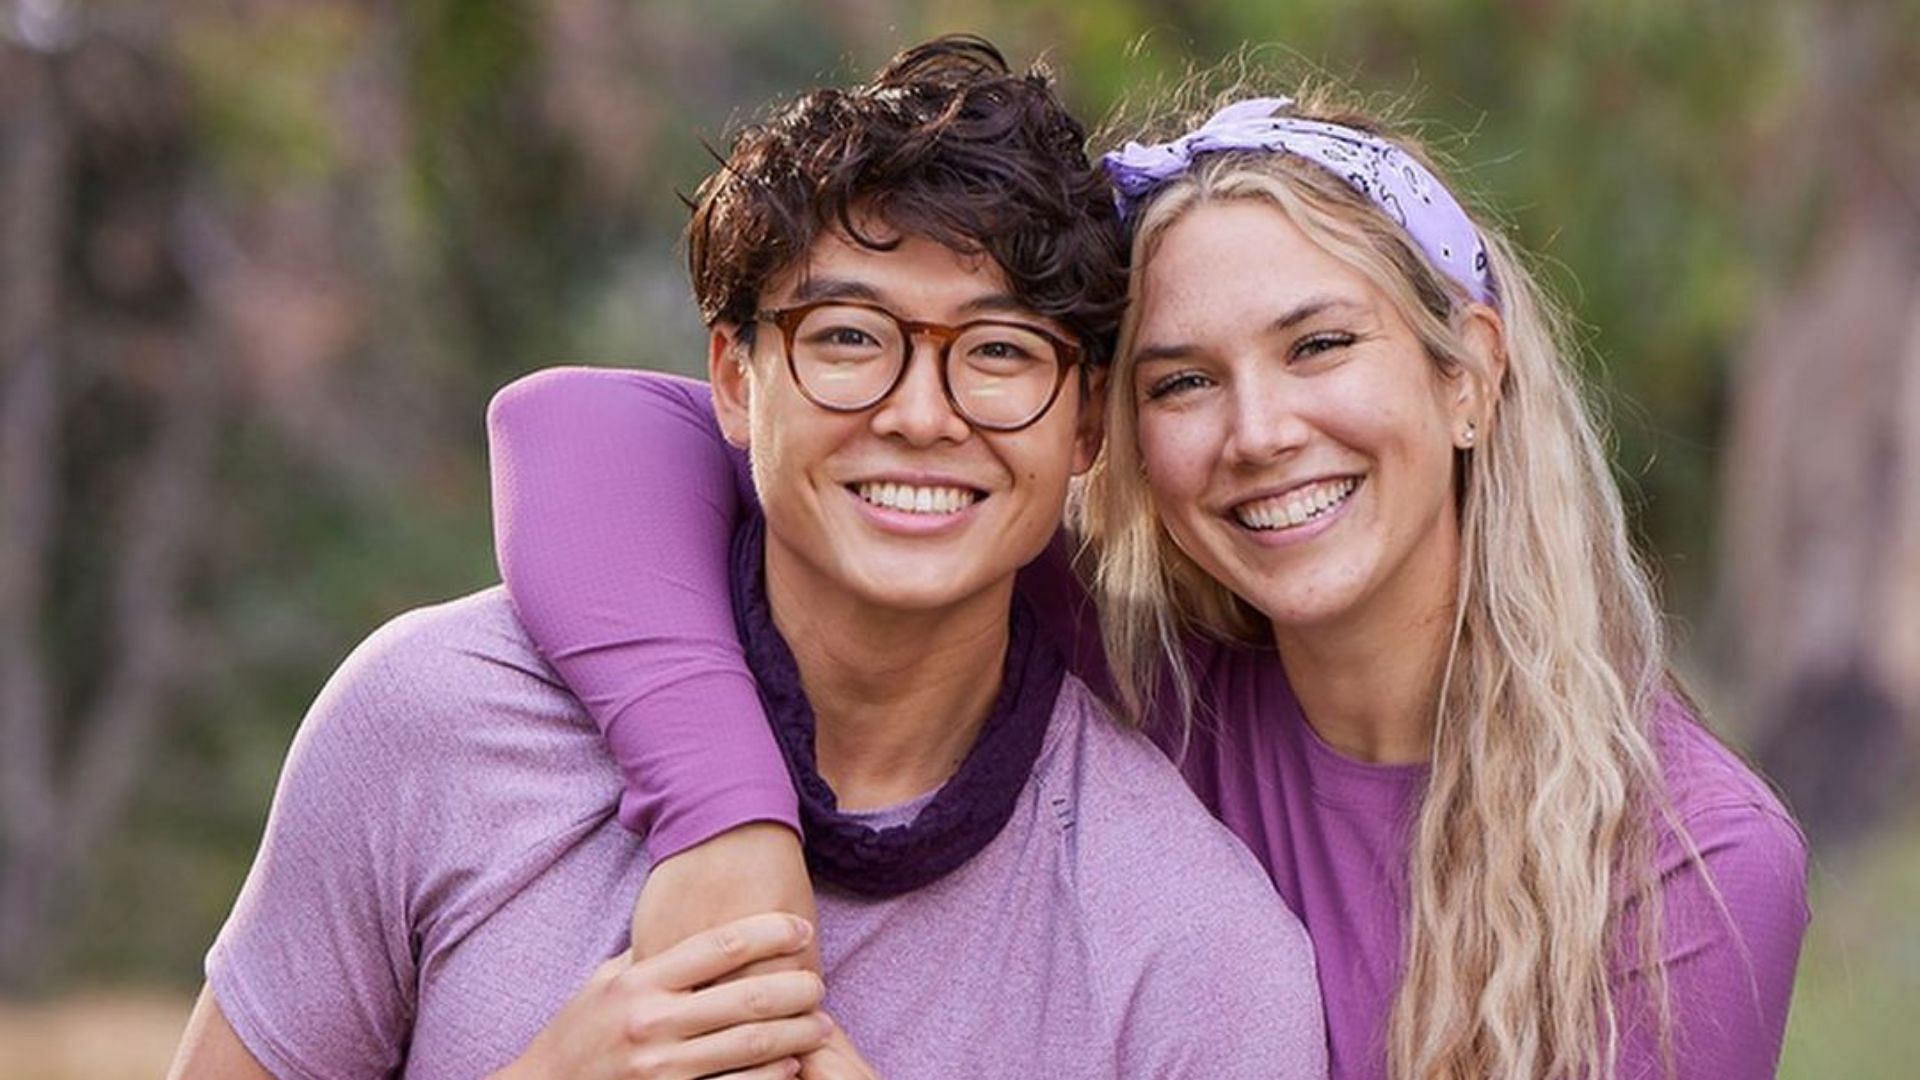 Derek and Claire from The Amazing Race (Image via Instagram/@derekxiao_)